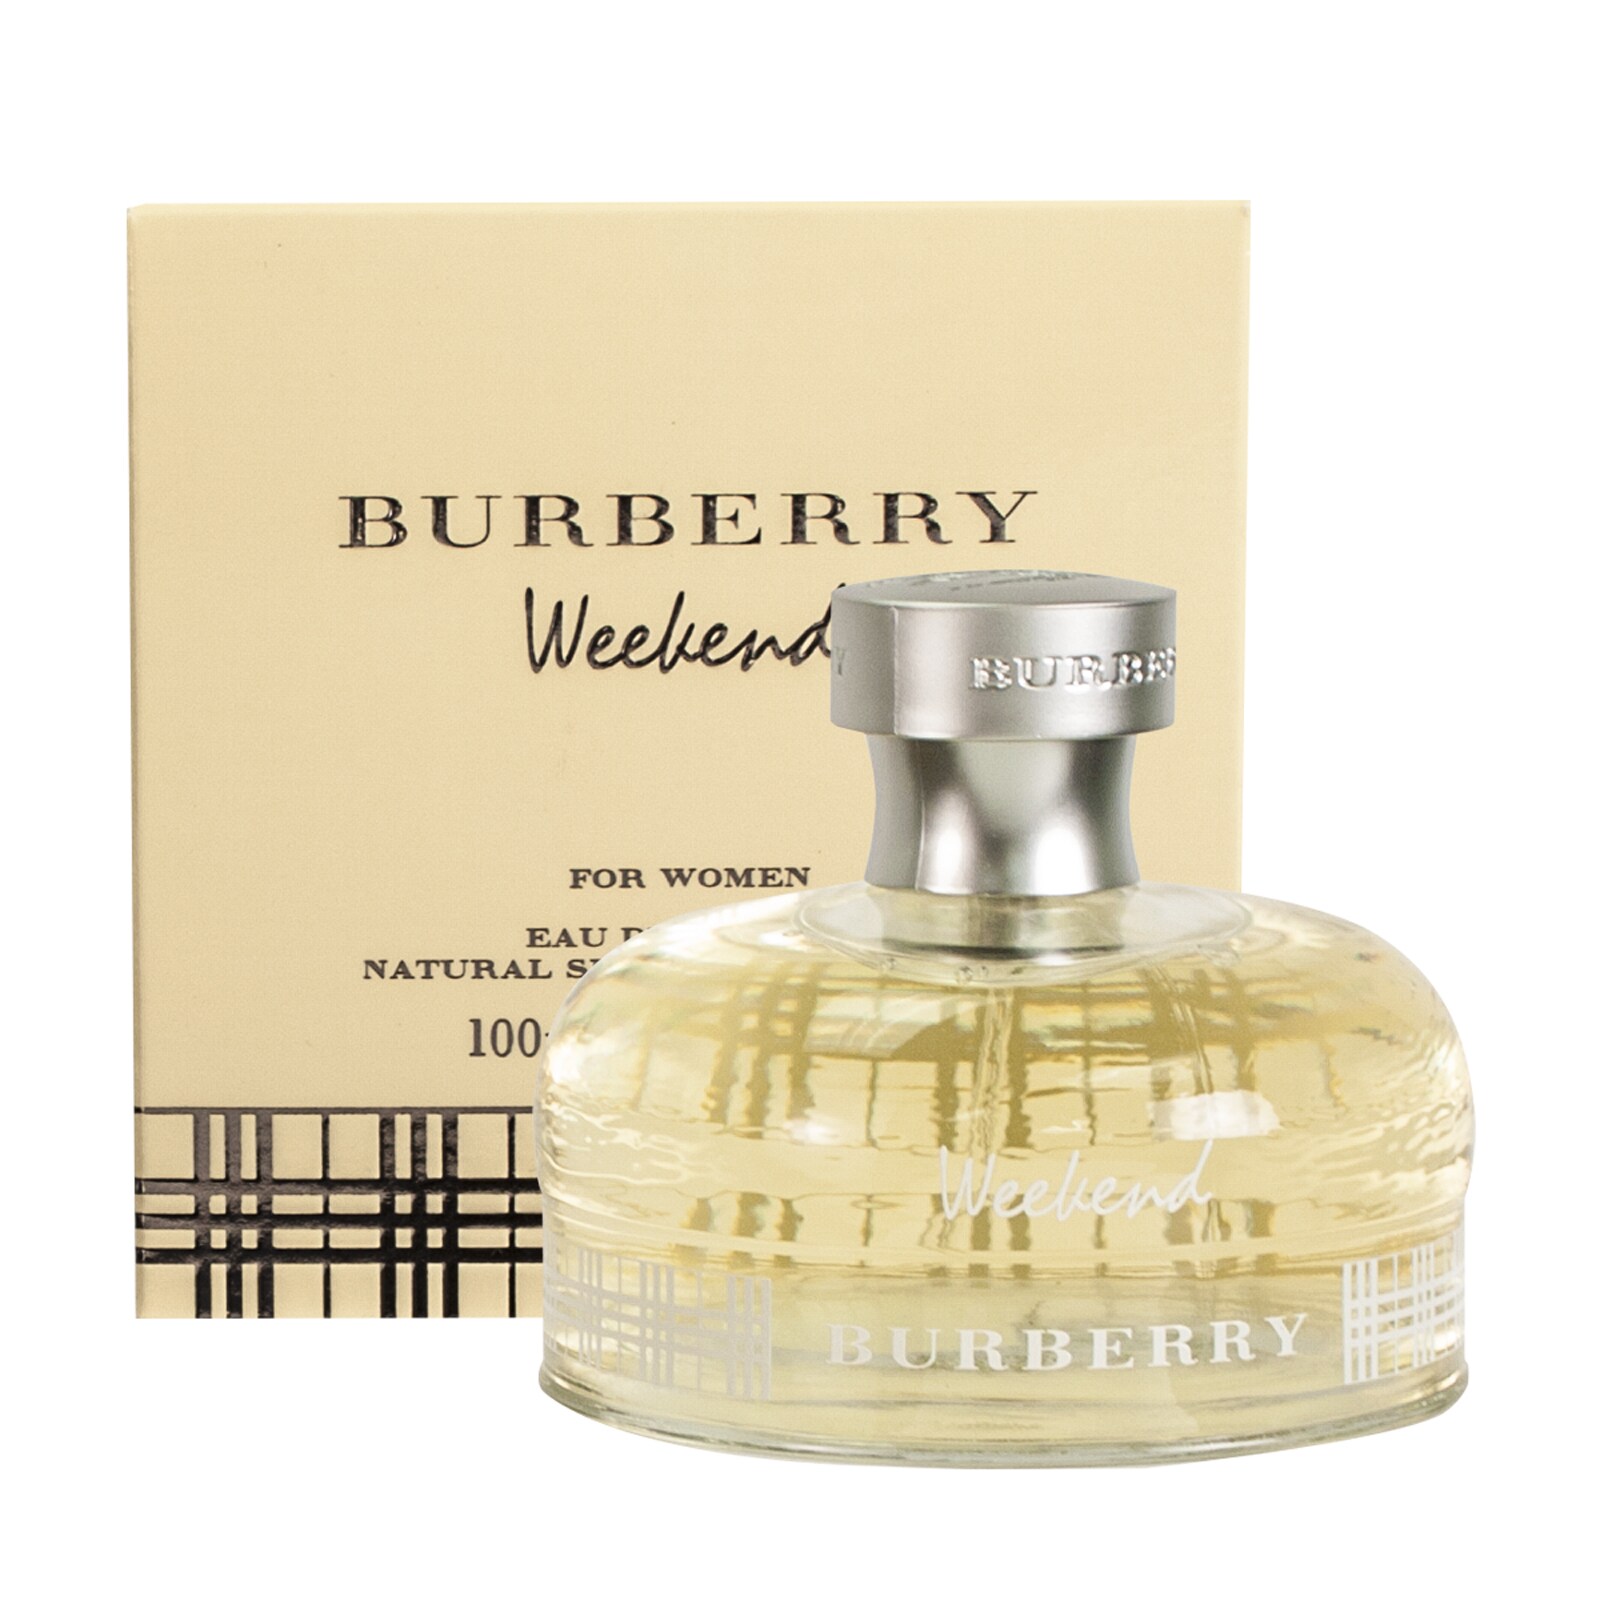 burberry weekend perfume for her